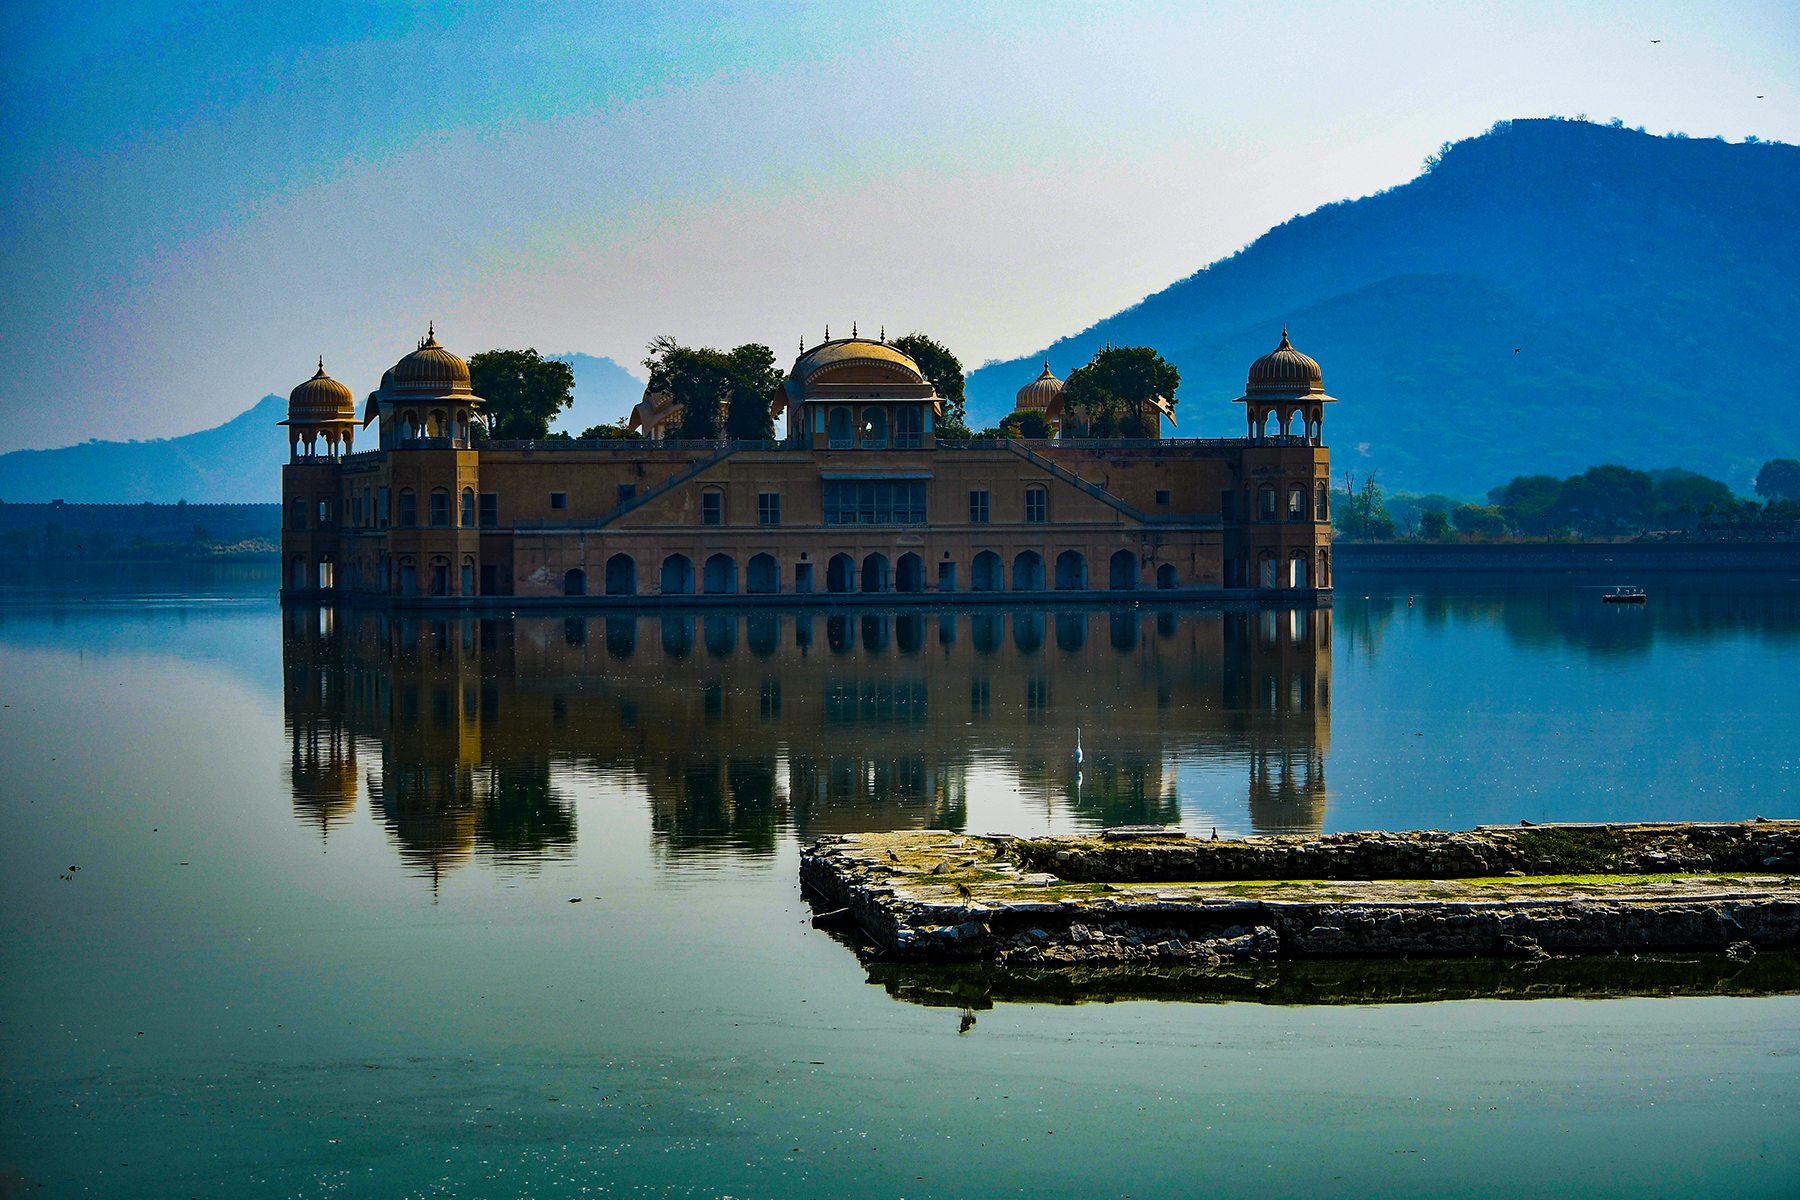 Situated in the middle of Mansagar Lake is the groovy Jal Mahal. It was built by Maharaja Jai Singh II in the 18th century, as a hunting lodge and summer retreat. Not visible is the high level of polution in the lake with lots of rubbish - I enhanced the colours a bit on my photo to give more blue and less grey and less yuck in the lake. 